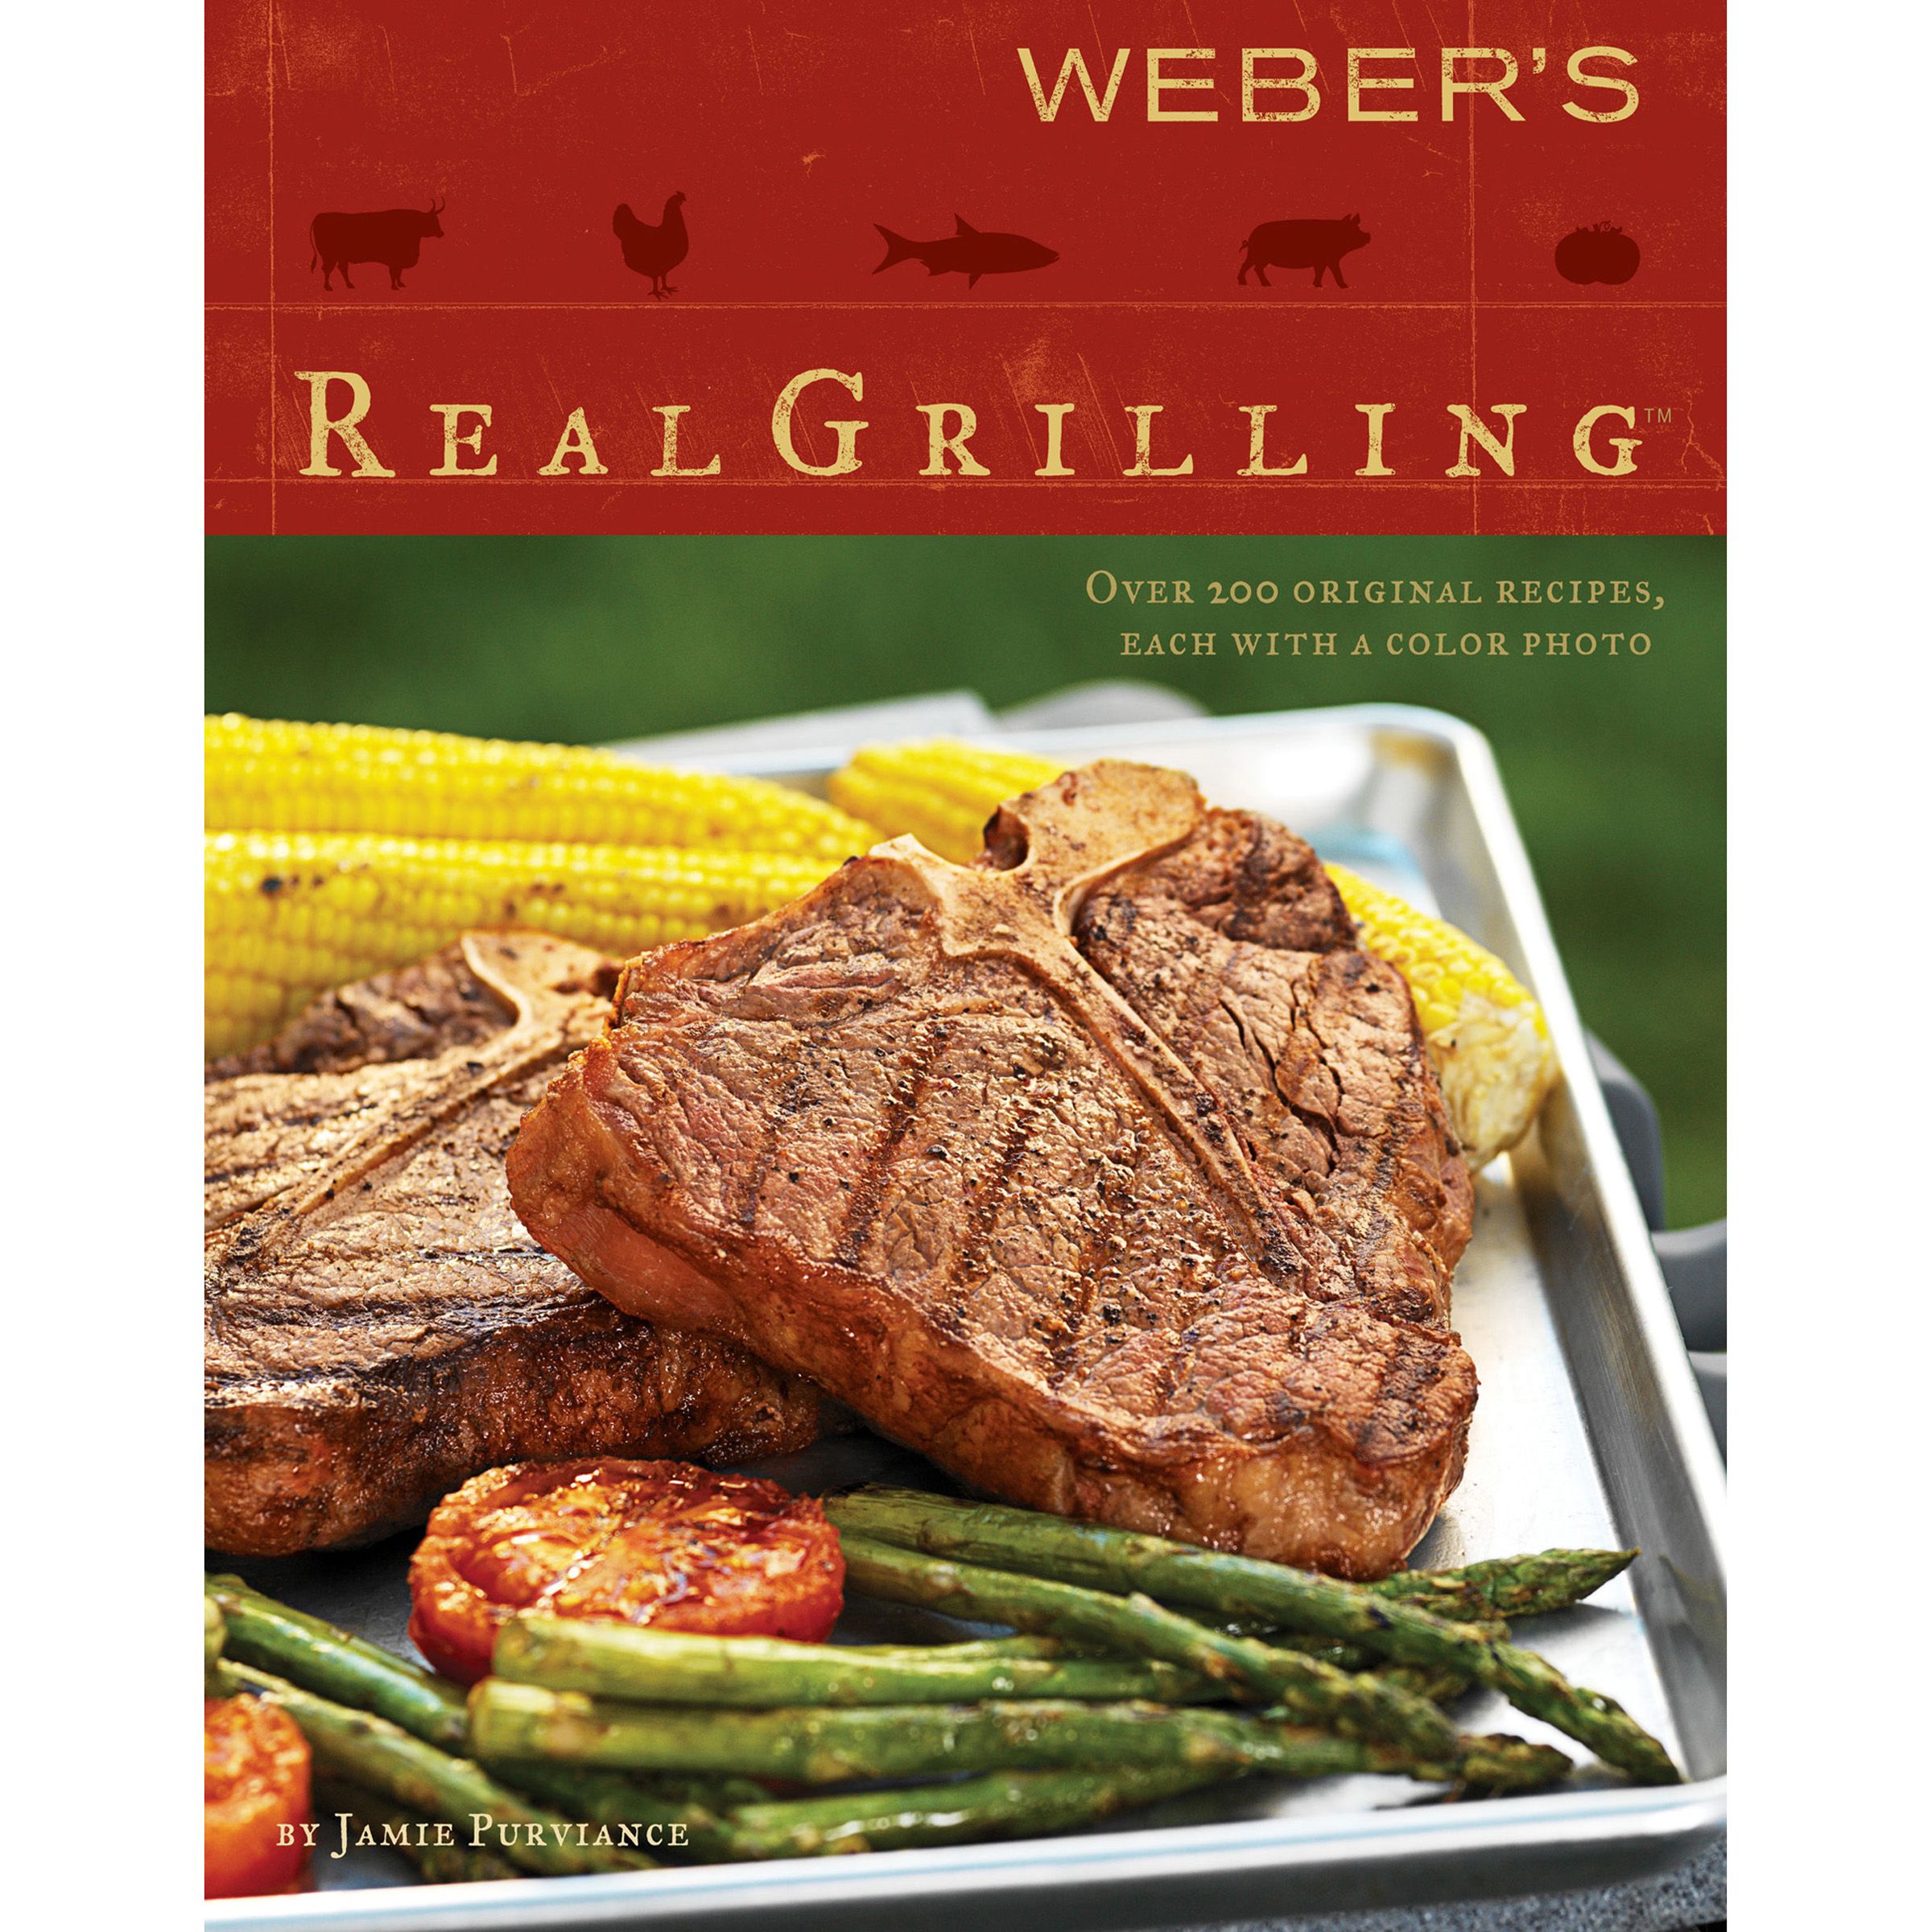 Webers Real Grilling